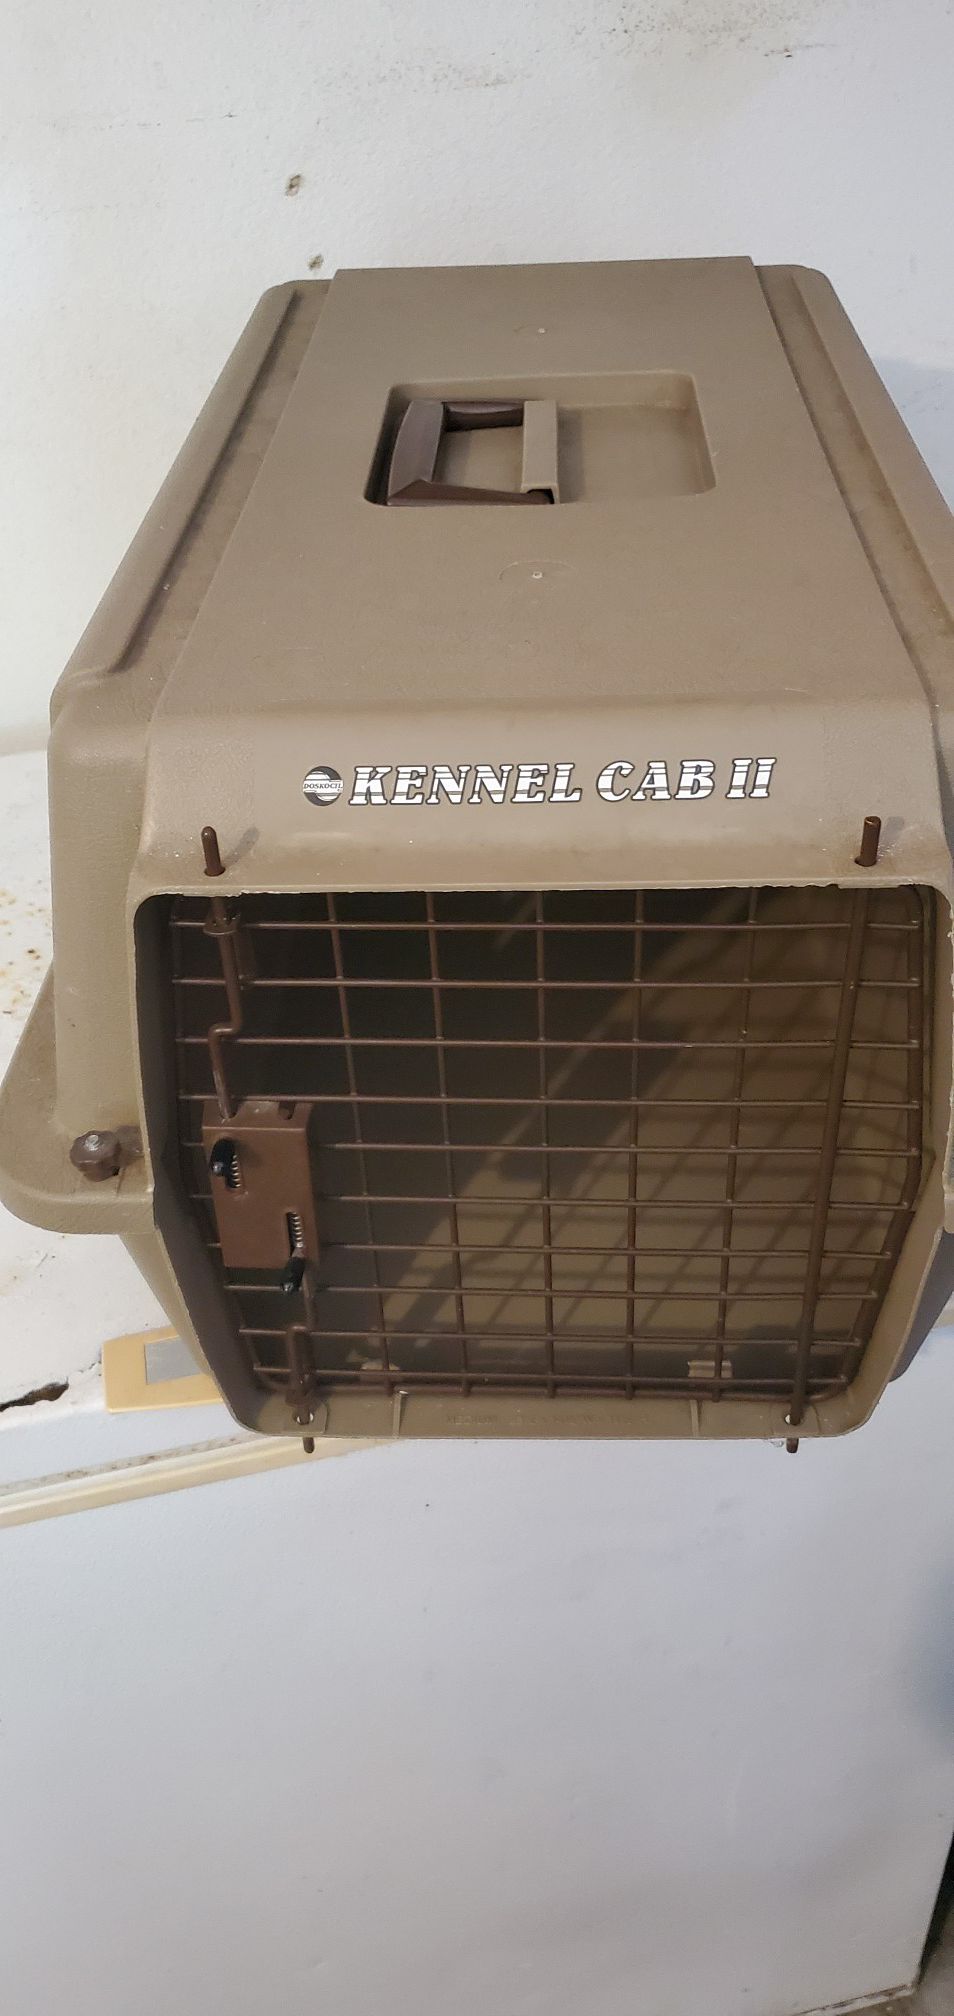 Kennel Cab II, Small Dog/Cat Carrier